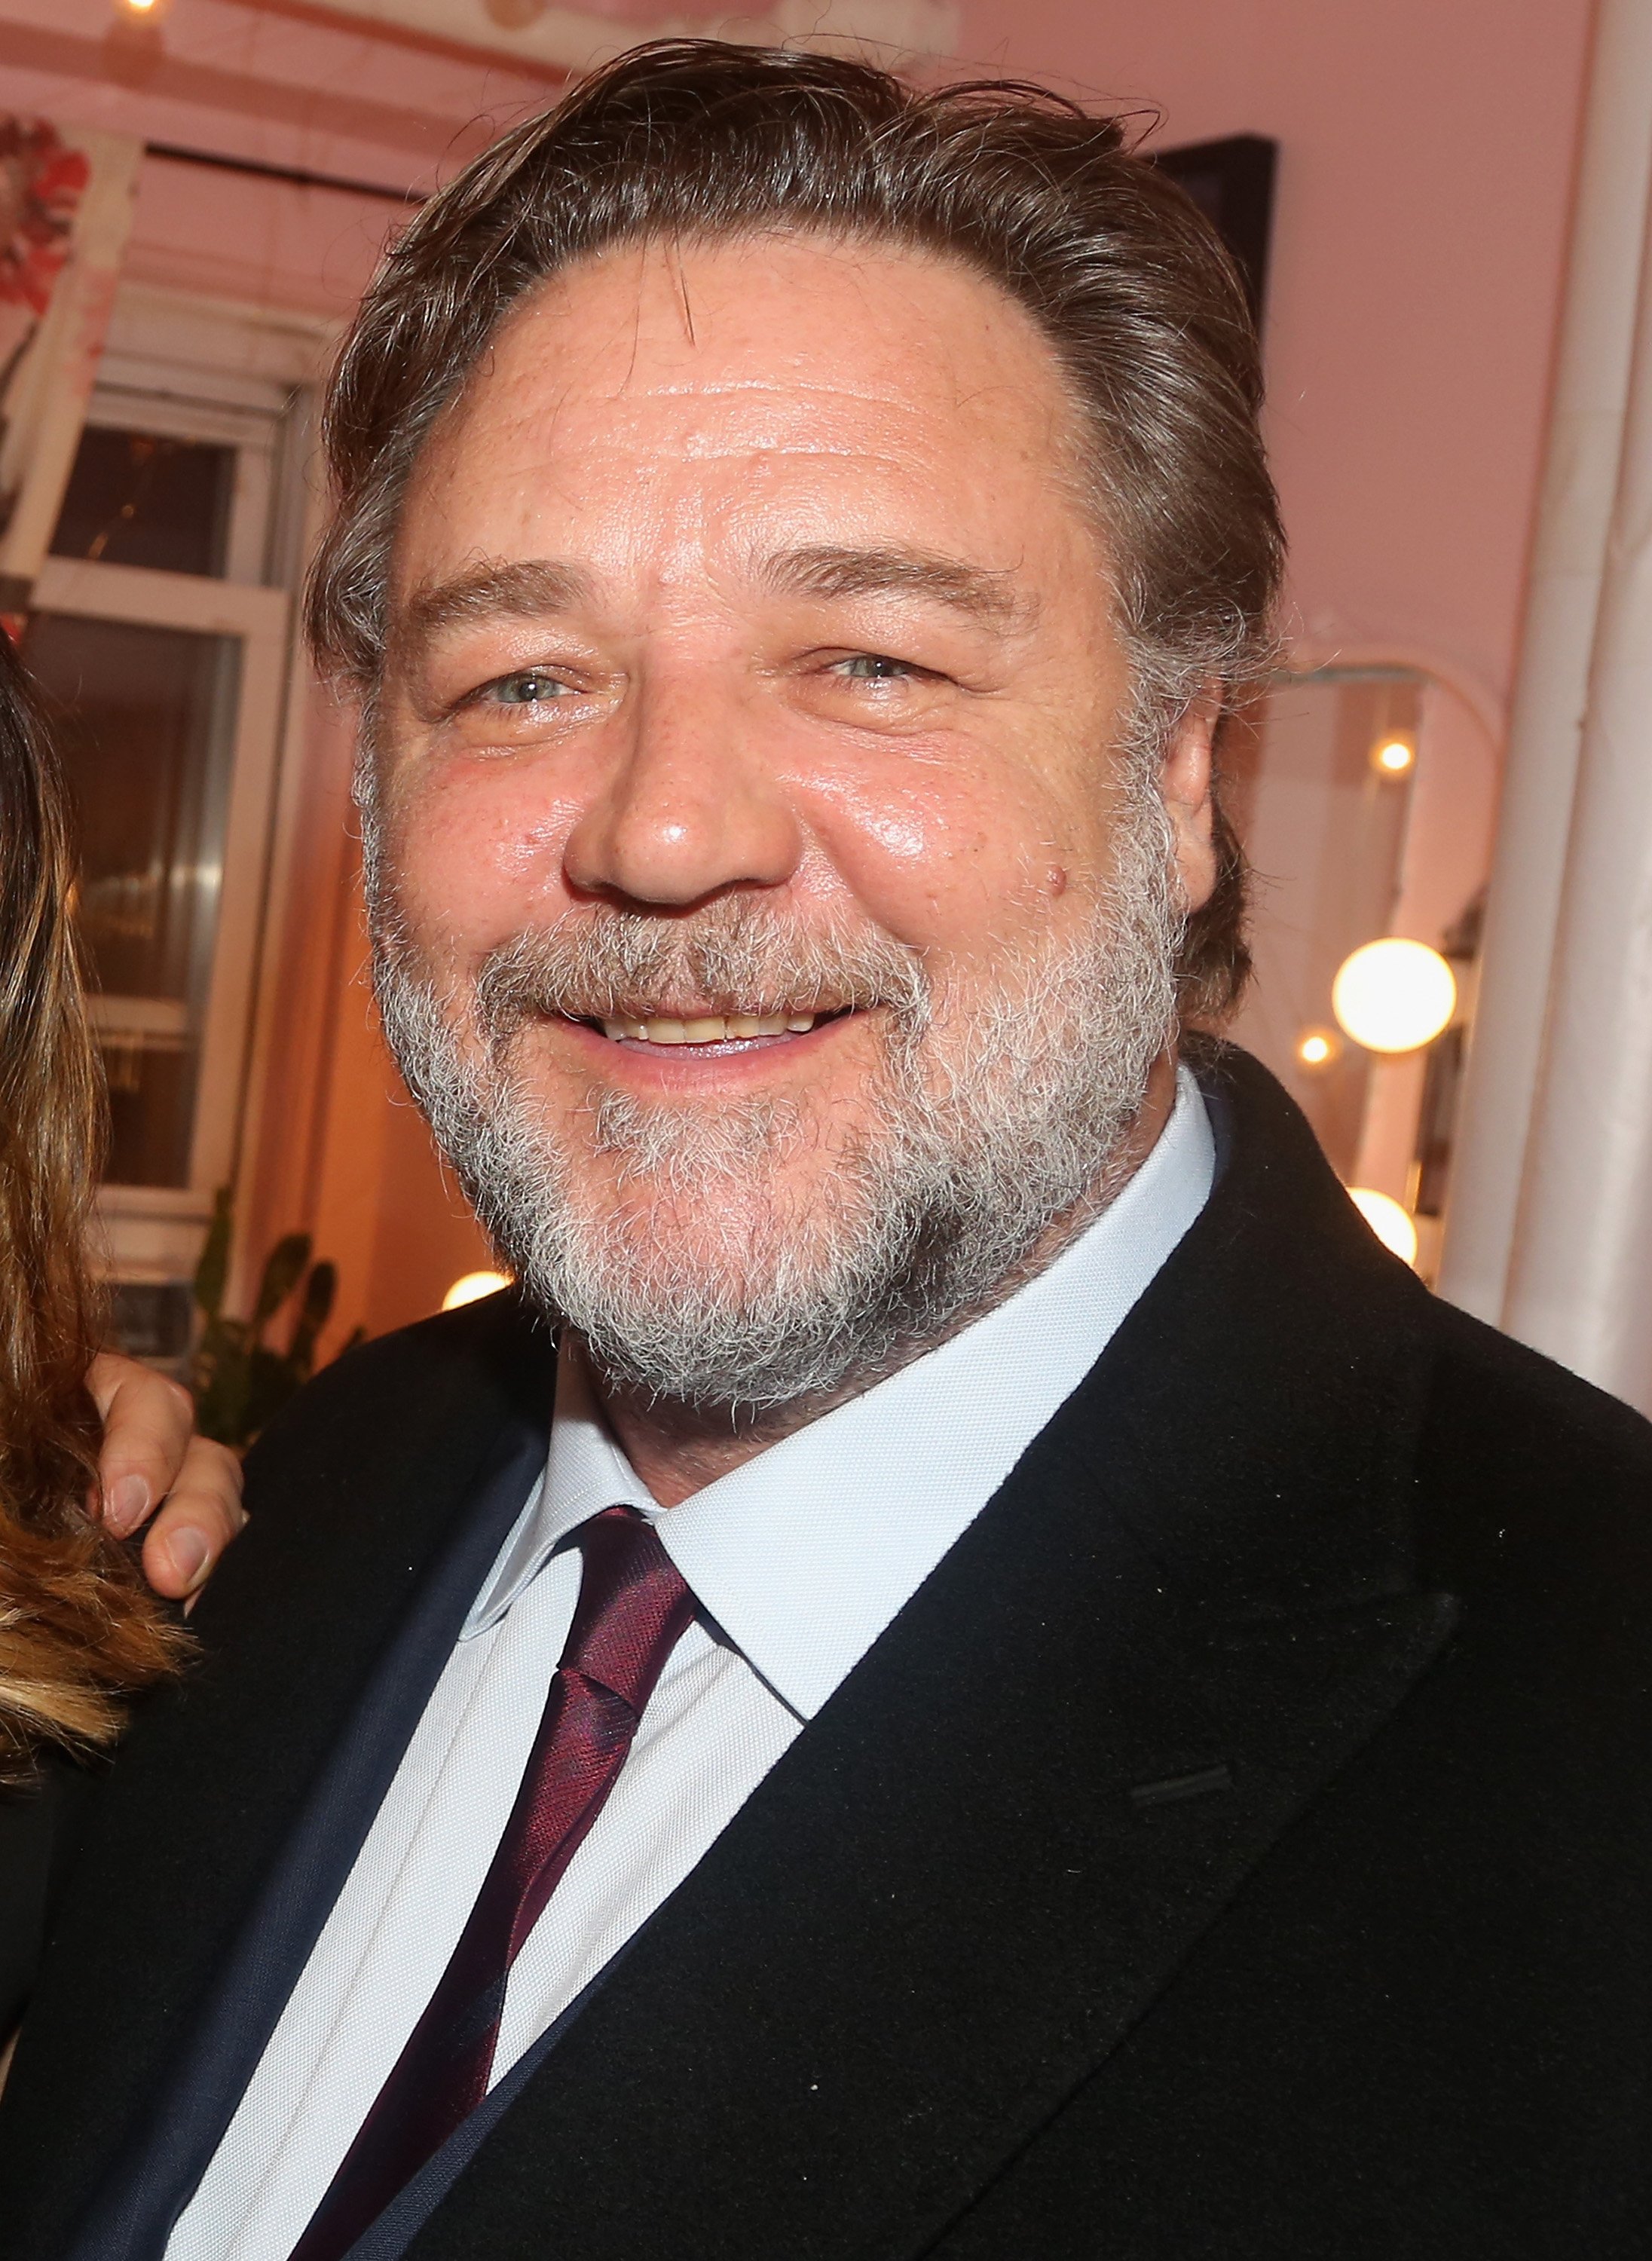 Russell Crowe poses backstage at the hit musical based on the film "Pretty Woman" on Broadway at The Nederlander Theatre on October 17, 2018, in New York City. | Source: Getty Images